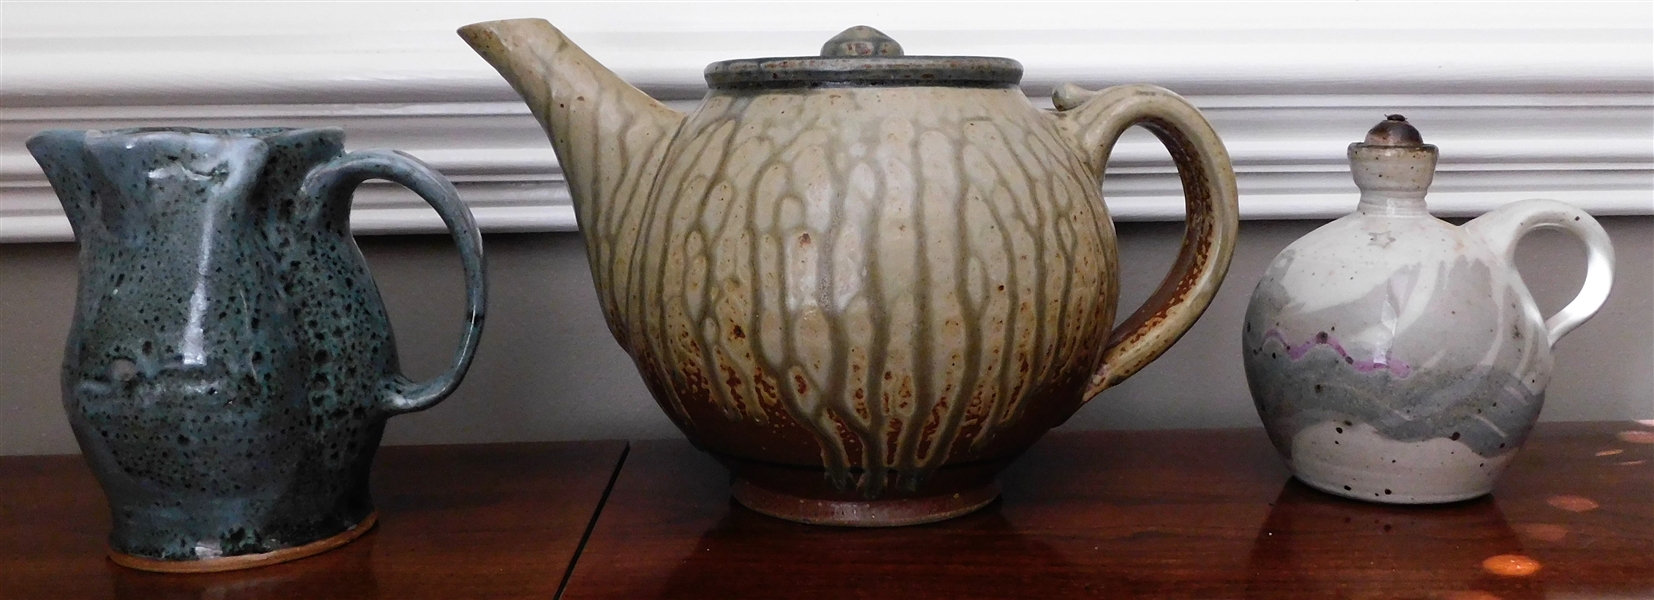 3 Pieces of Art Pottery including Tea Pot 6" tall 10" Spout To Handle, MB Pitcher, and Oil Lamp